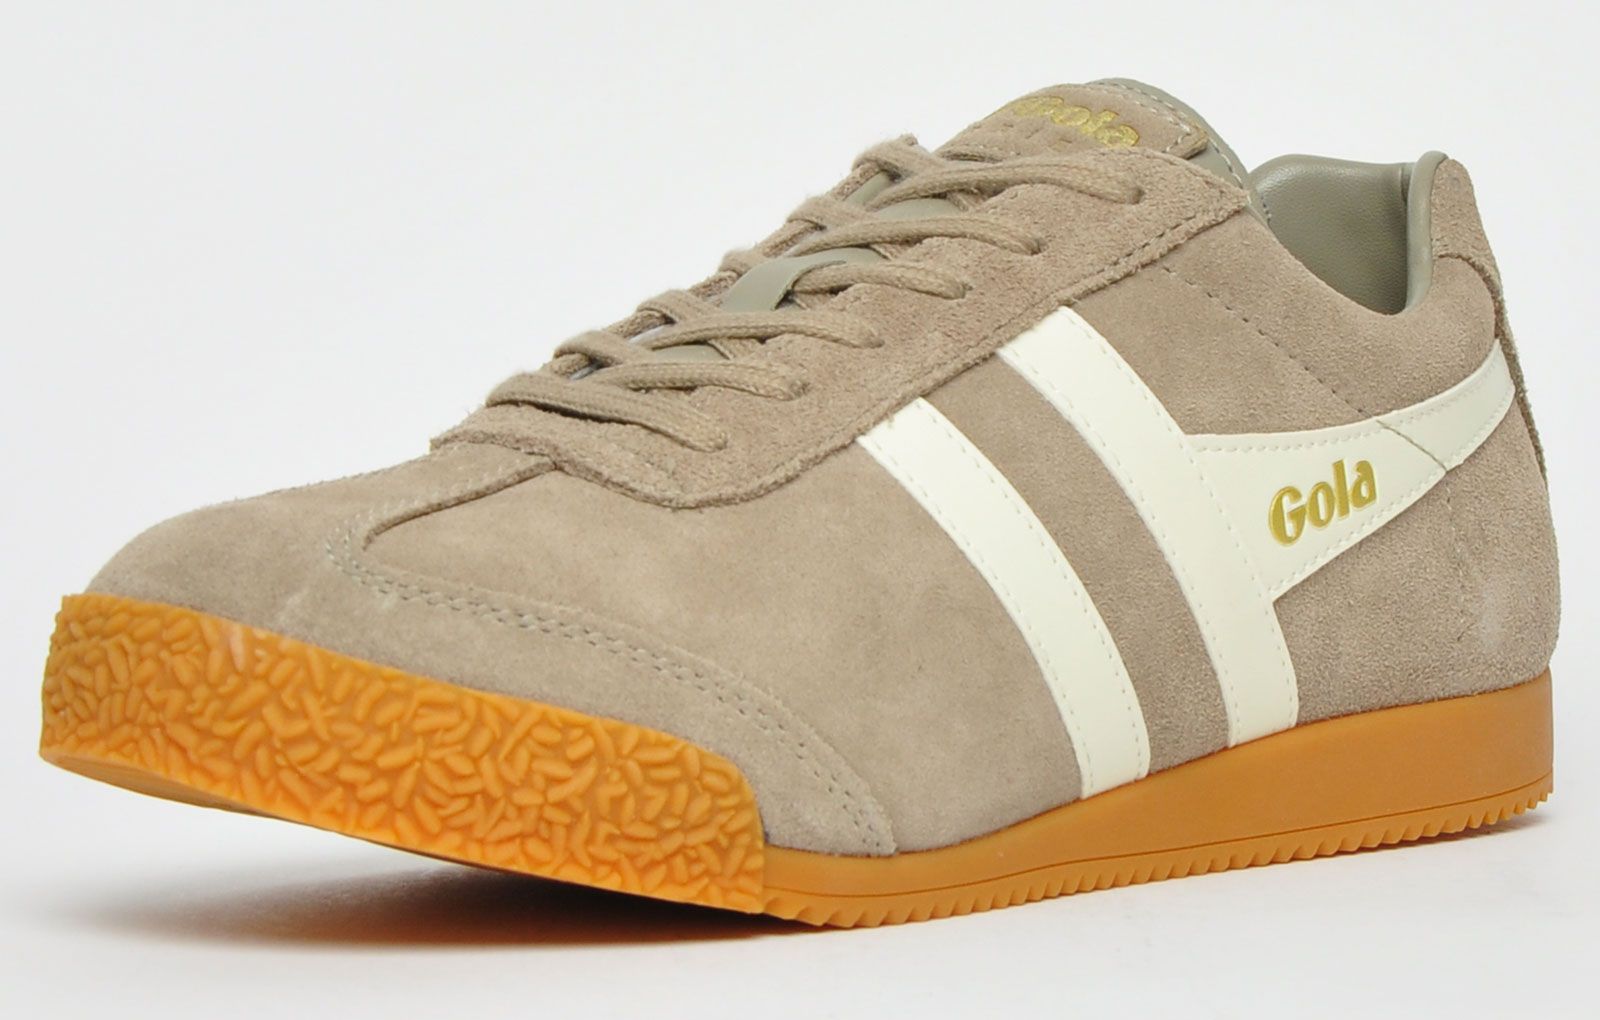 <p>These Gola Classics Harrier Suede men’s trainers are the perfect choice of footwear for casual days, delivering a timeless retro inspired design that oozes vintage charm that will enhance any casual outfit. Complete with a premium suede leather construction and intricate stitch detailing throughout to provide a five-star finish. </p> <p>- Gola Classics vintage silhouette</p> <p> - Secure lace up fastening delivers a snug fit </p> <p>- Premium suede leather upper delivers added flare</p> <p> - Intricate stitch detailing provides a five-star finish</p> <p> - Cushioned inner delivers a sumptuous wear </p> <p>- Durable outsole provides added traction</p> <p> - Gola Classics branding throughout</p>